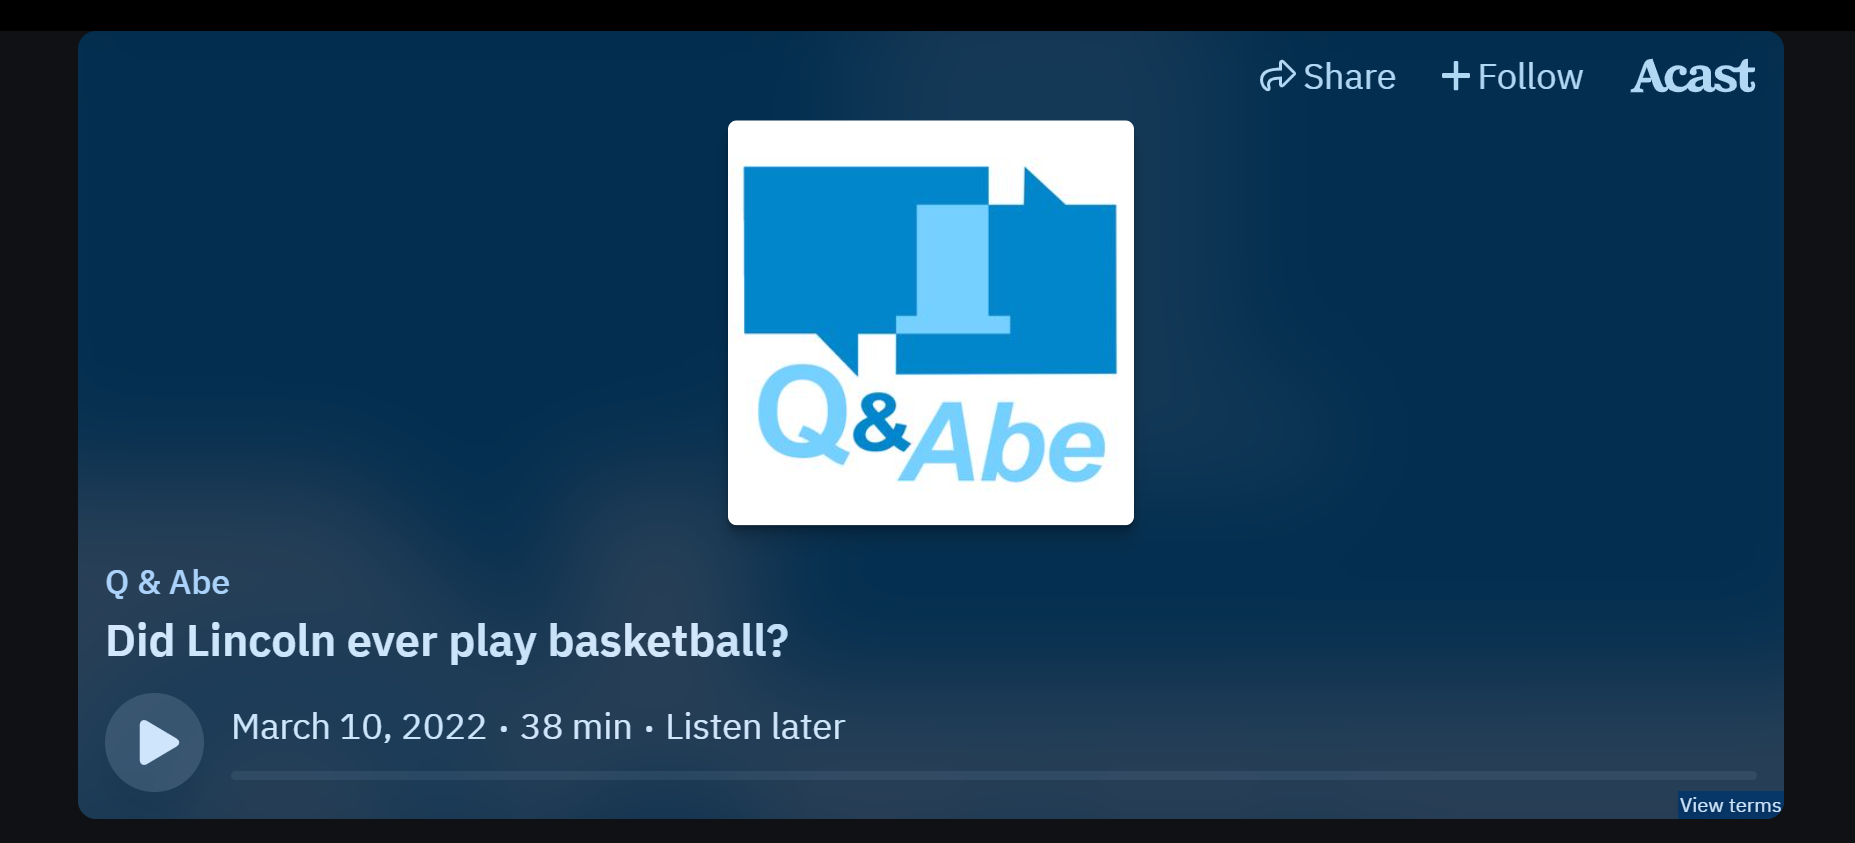 A blue rectangle with a logo at the center featuring speech bubbles and the title Q & Abe with additional text including the date March 10, 2022 and a play button at the bottom.